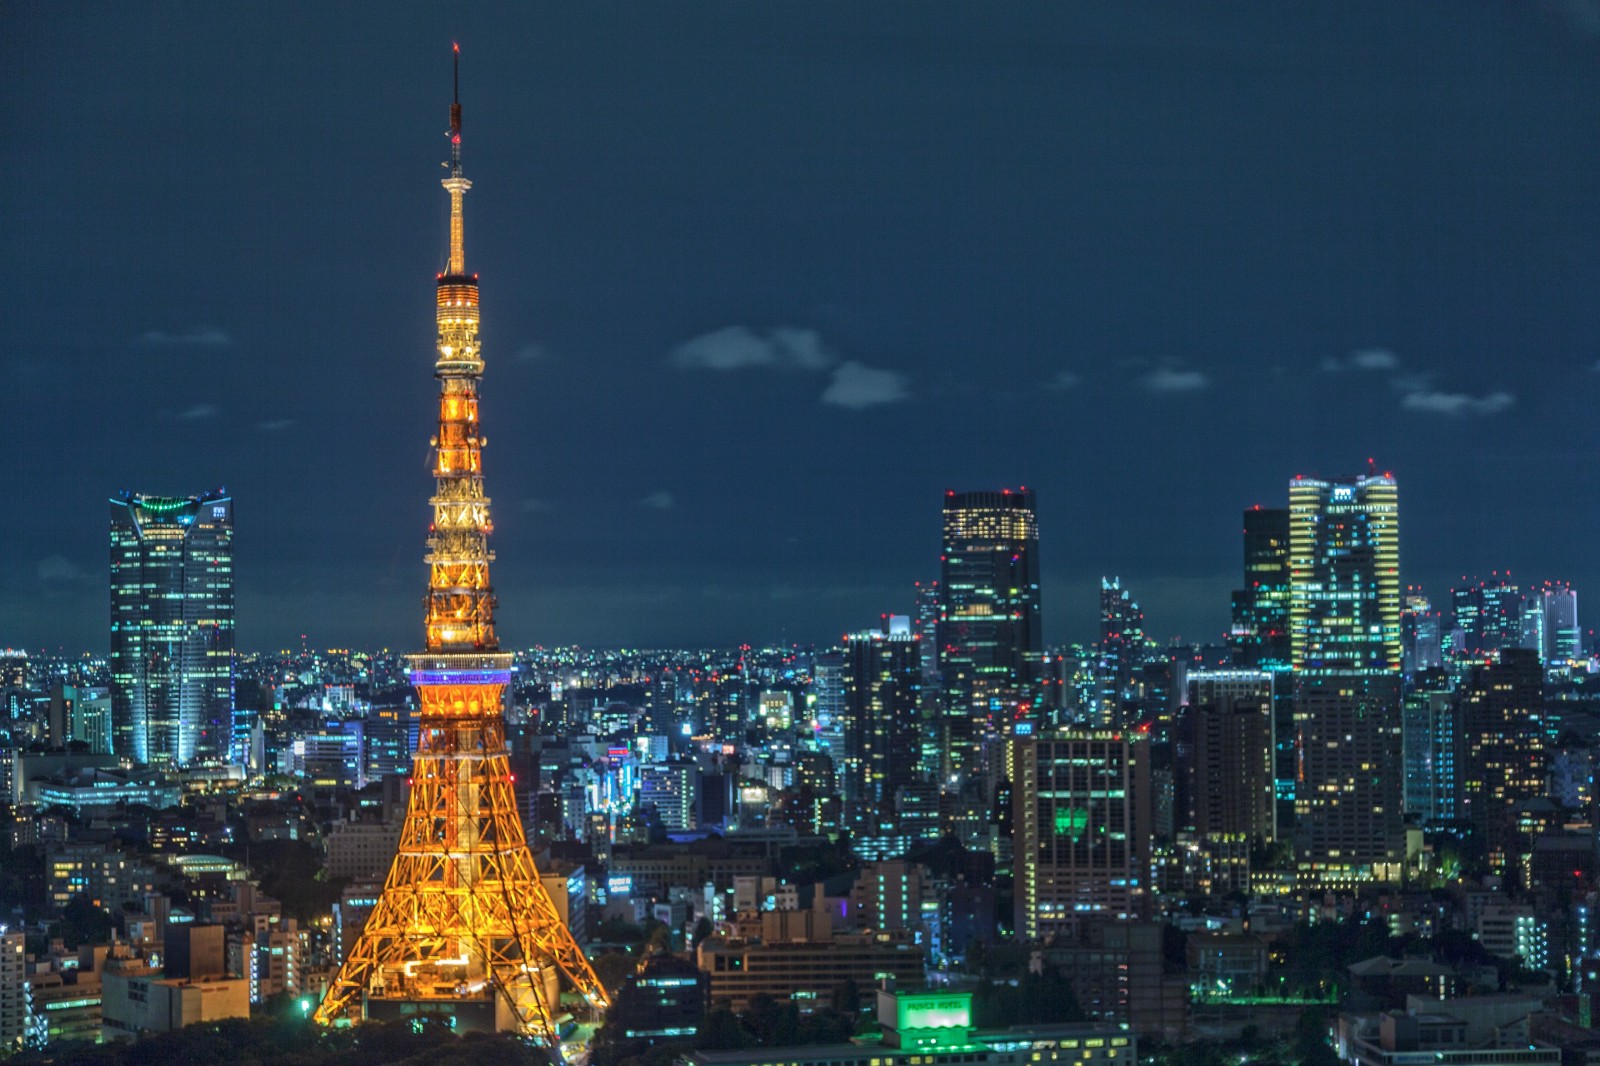 Tokyo by Night: Tokyo Tower and high-rise buildings